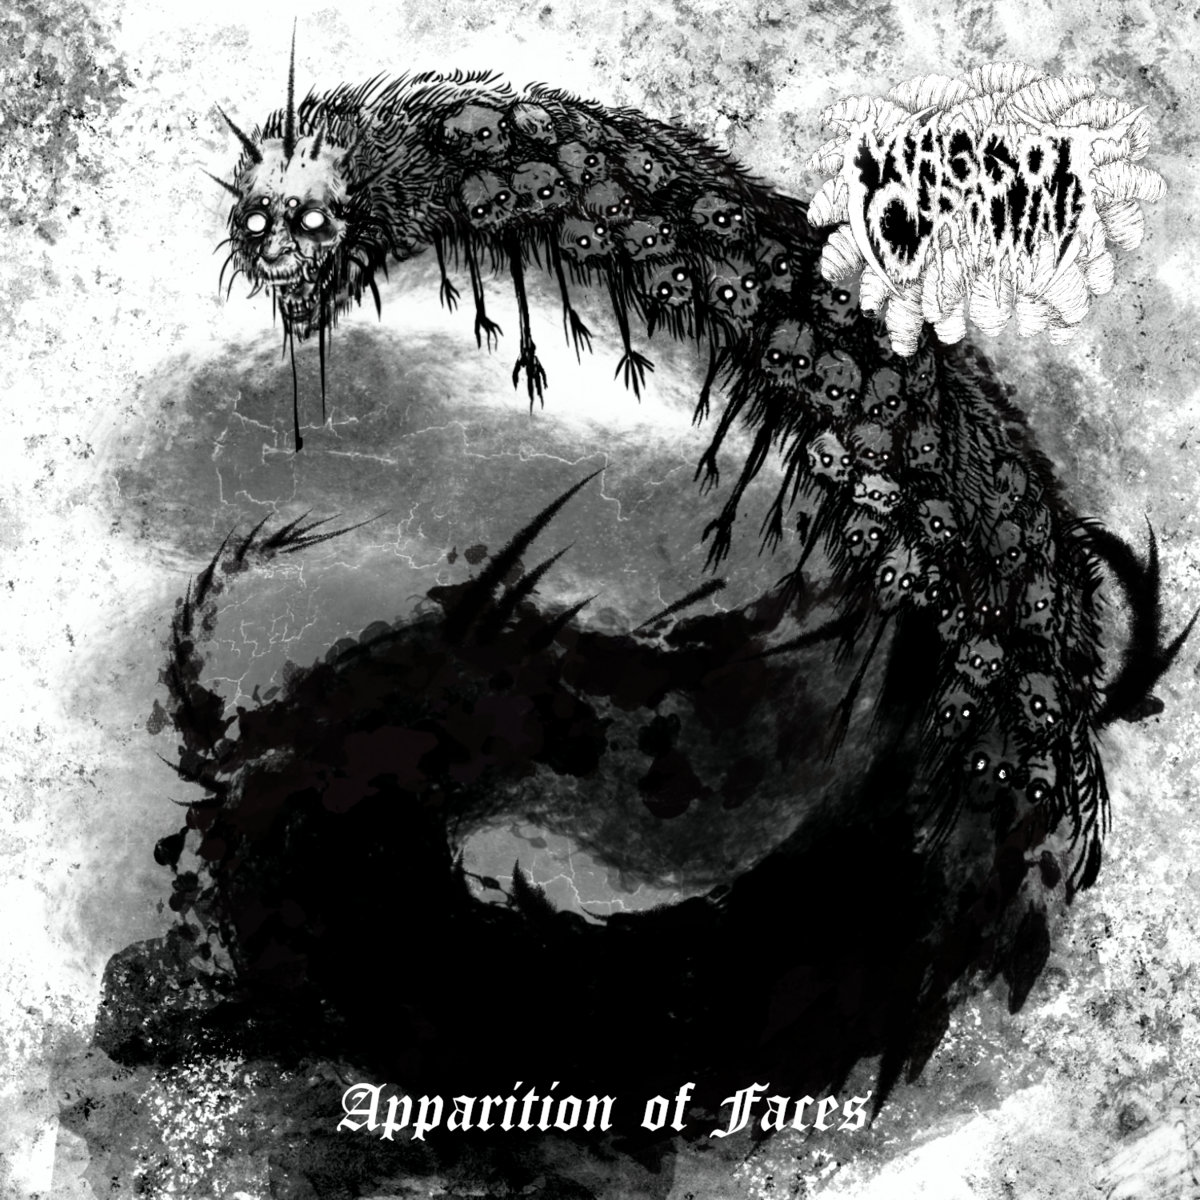 Maggot Crown - "Apparition of Faces" - 2023